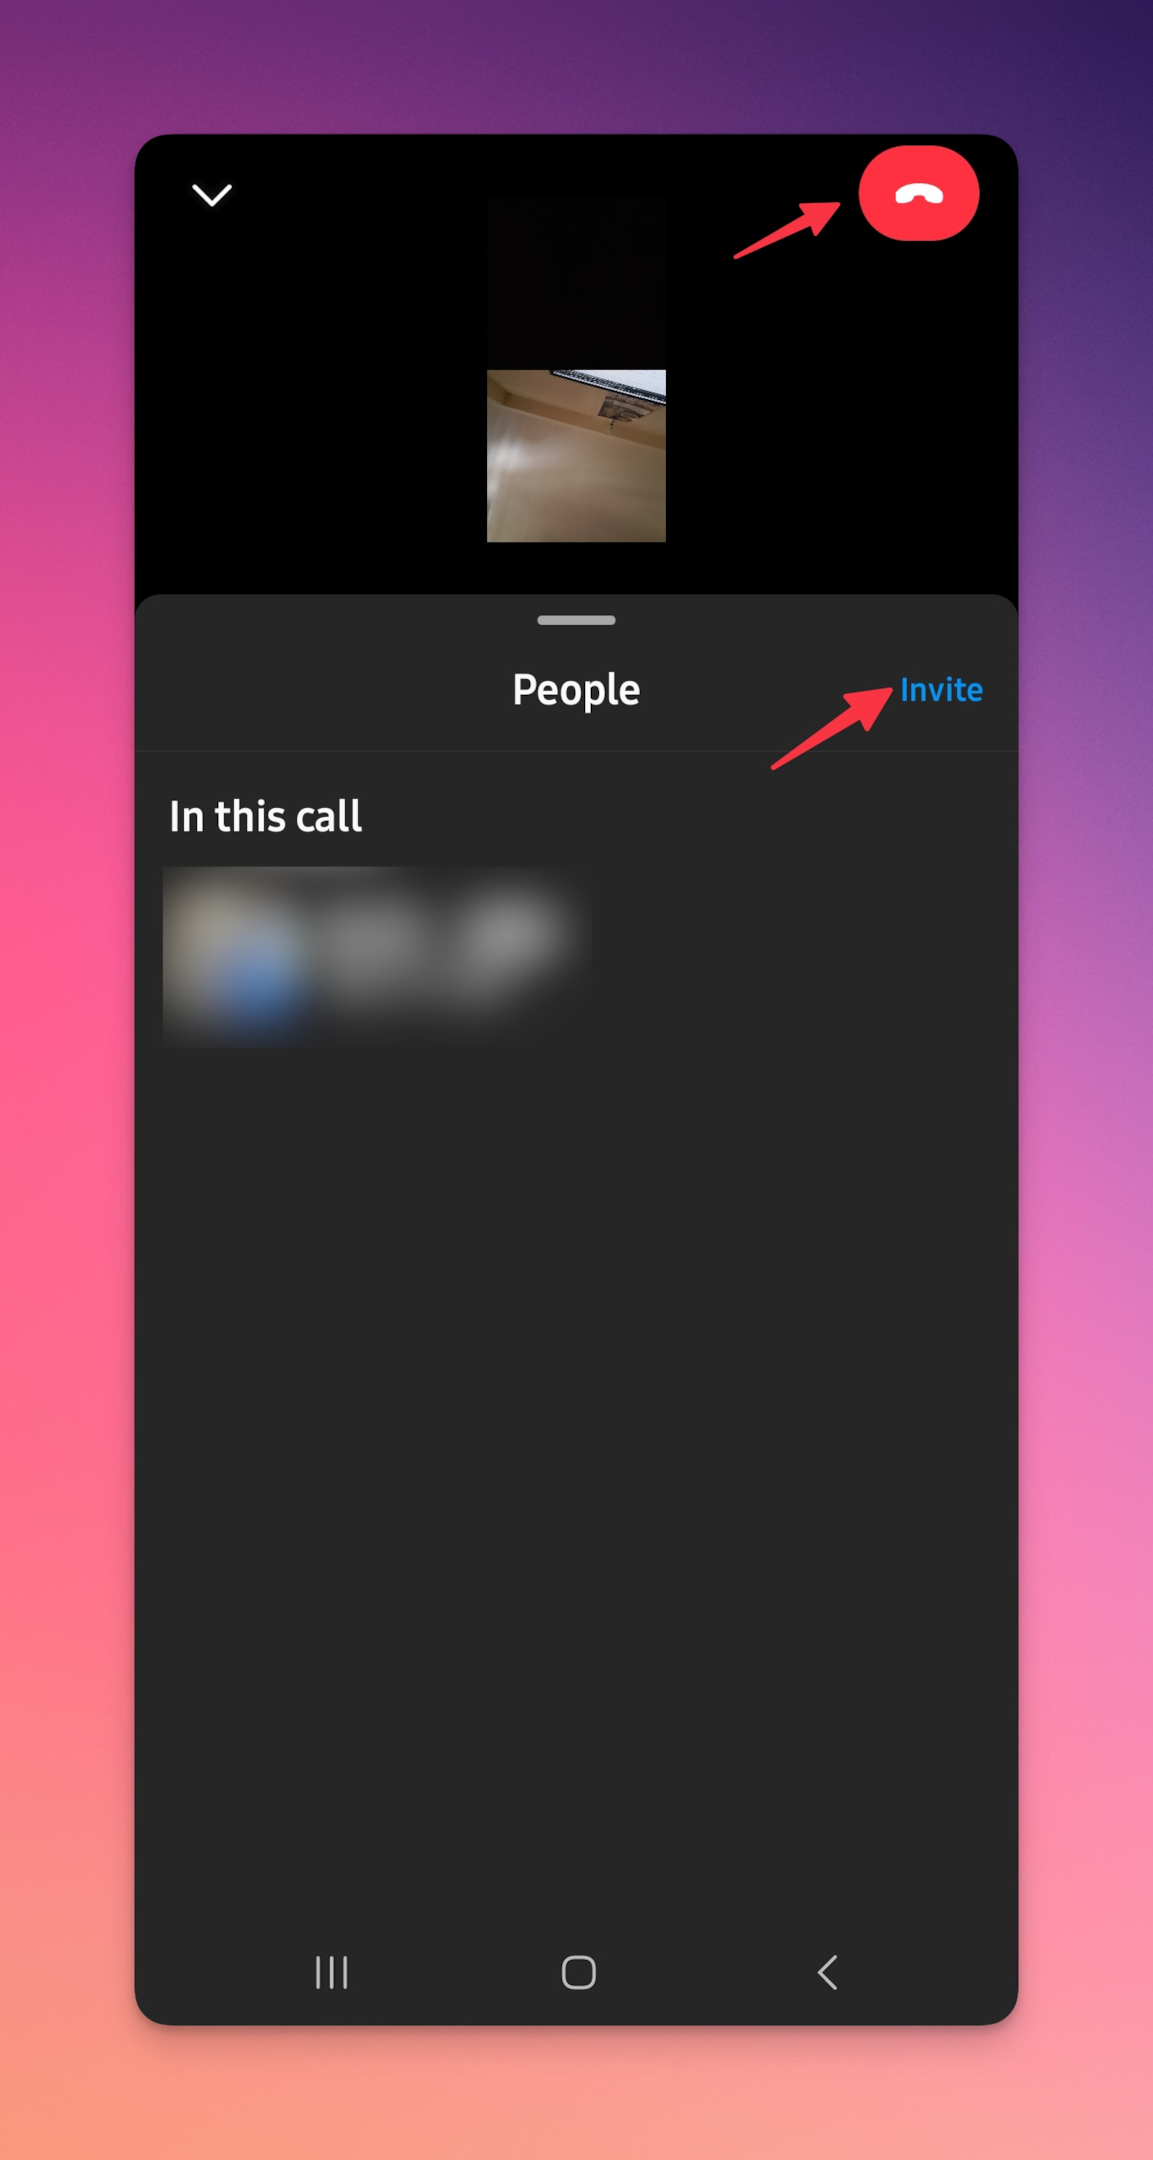 Remote.tools shows to tap on Invite button to add people to your video chat on Instagram